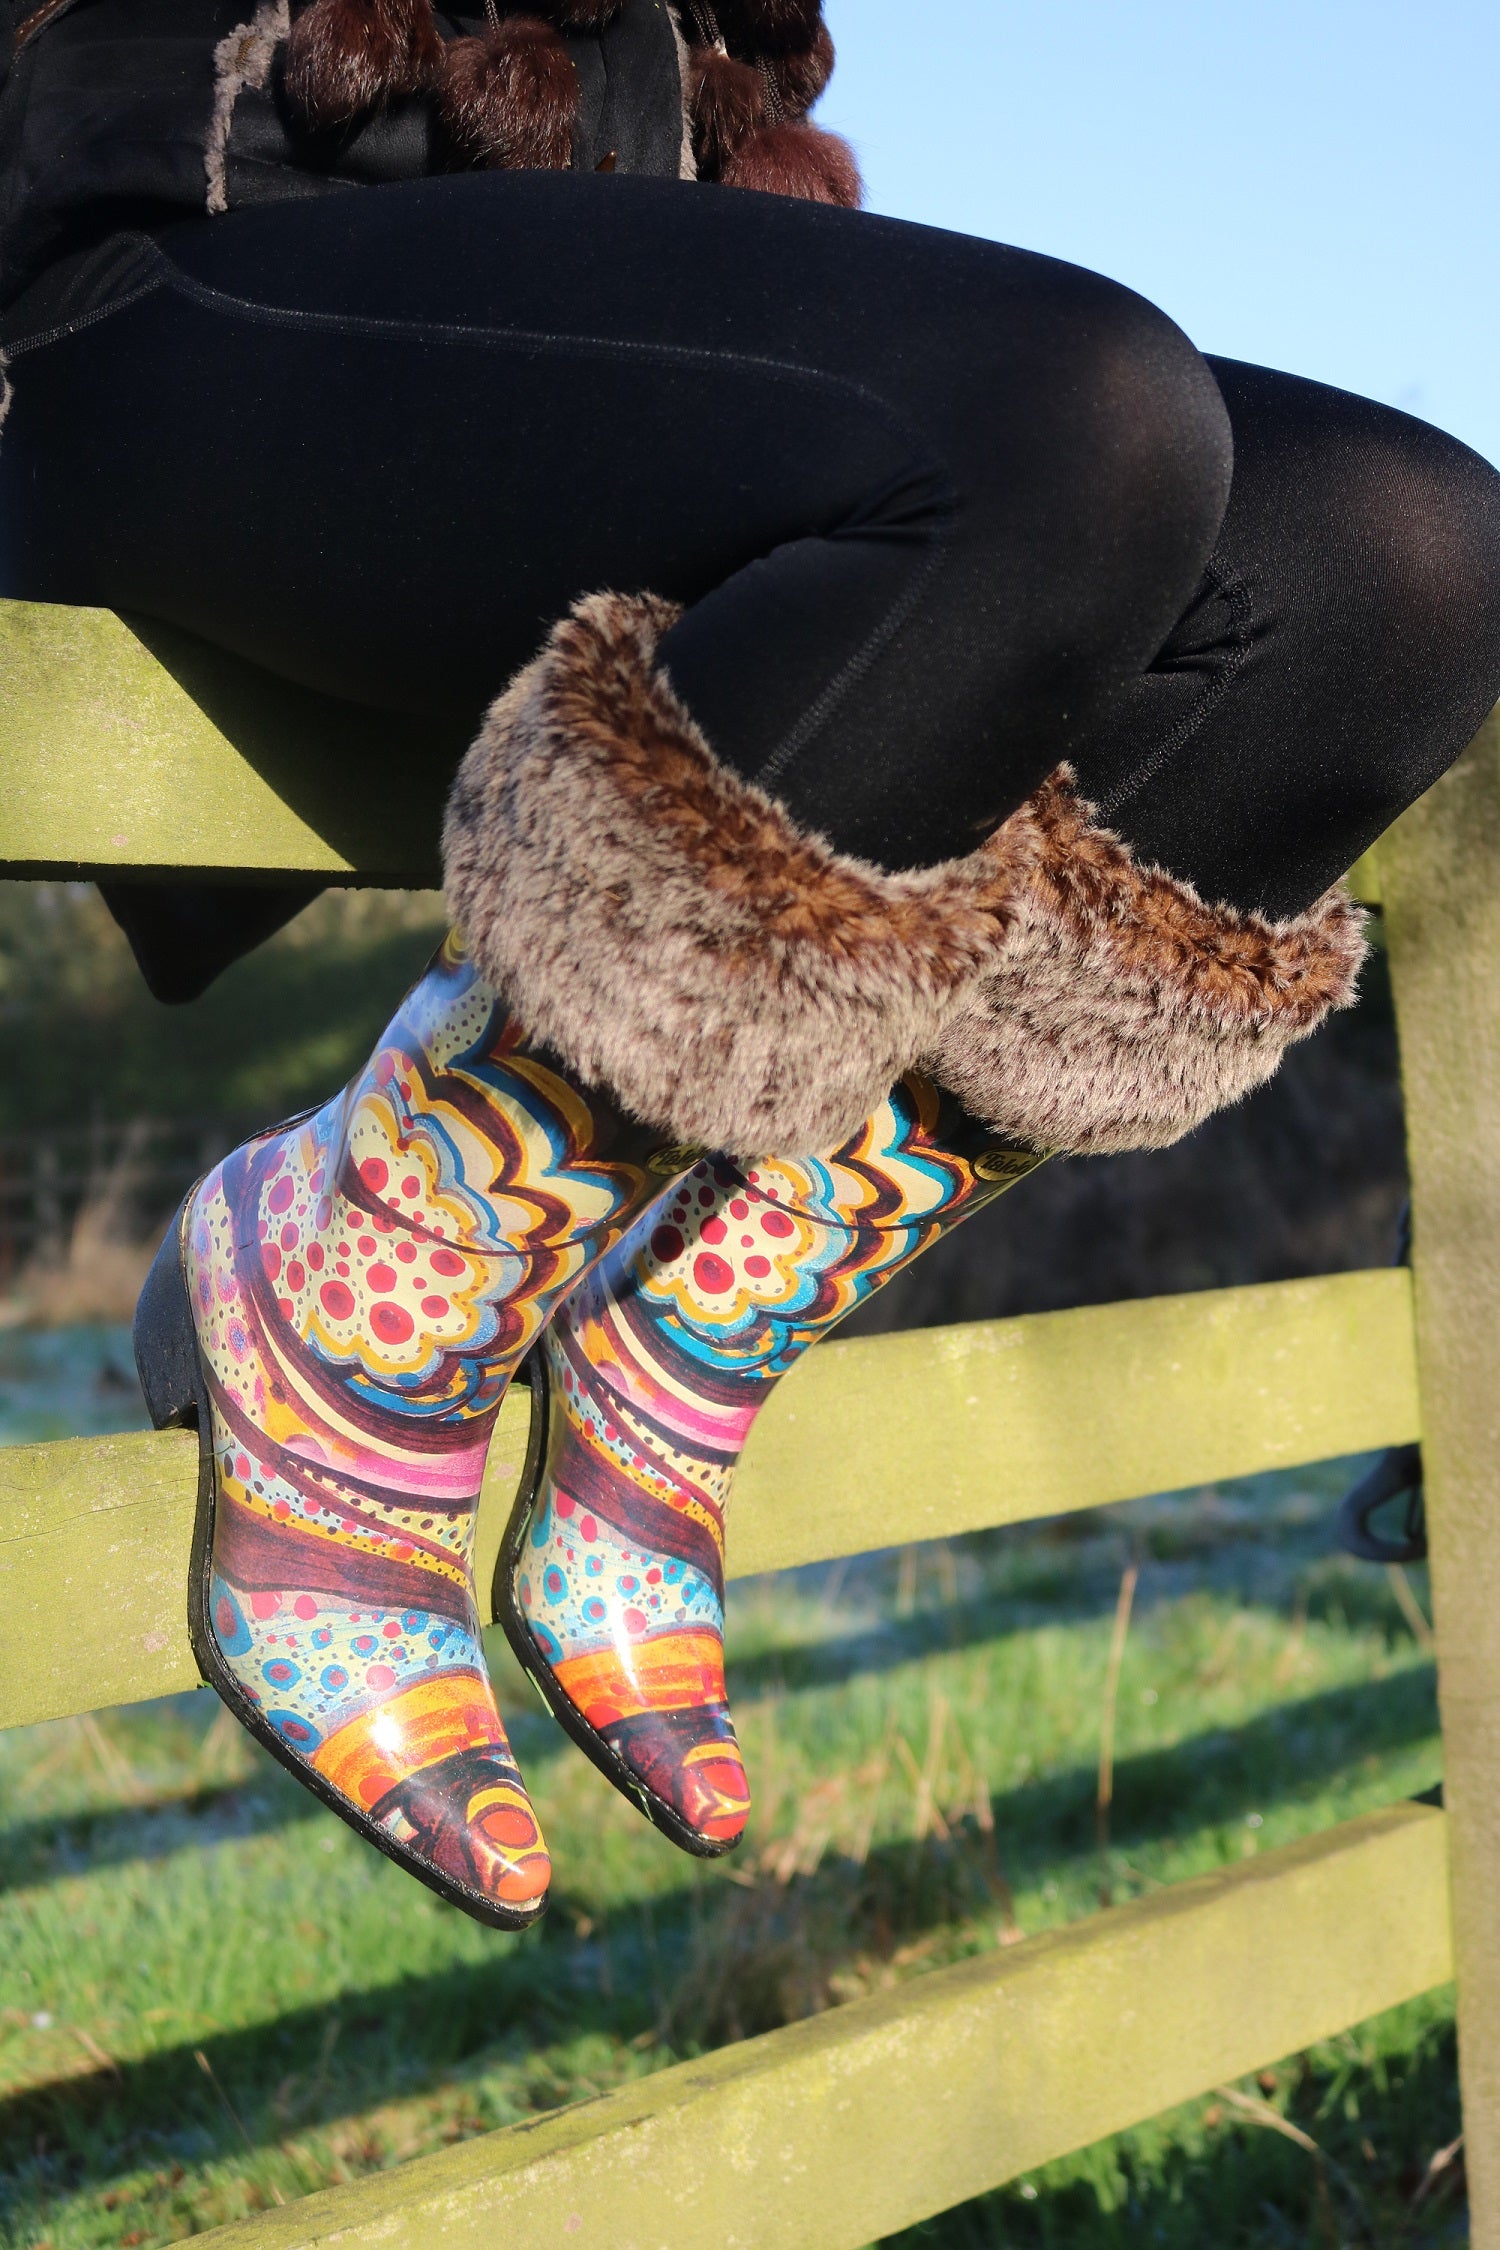 Wild, bright and super funky with prints of pink, blue and yellow, these Talolo Women's Floral Bliss pointed cowboy welly boots have a 3cm heel and will reach the middle of your calf. Lined for comfort.